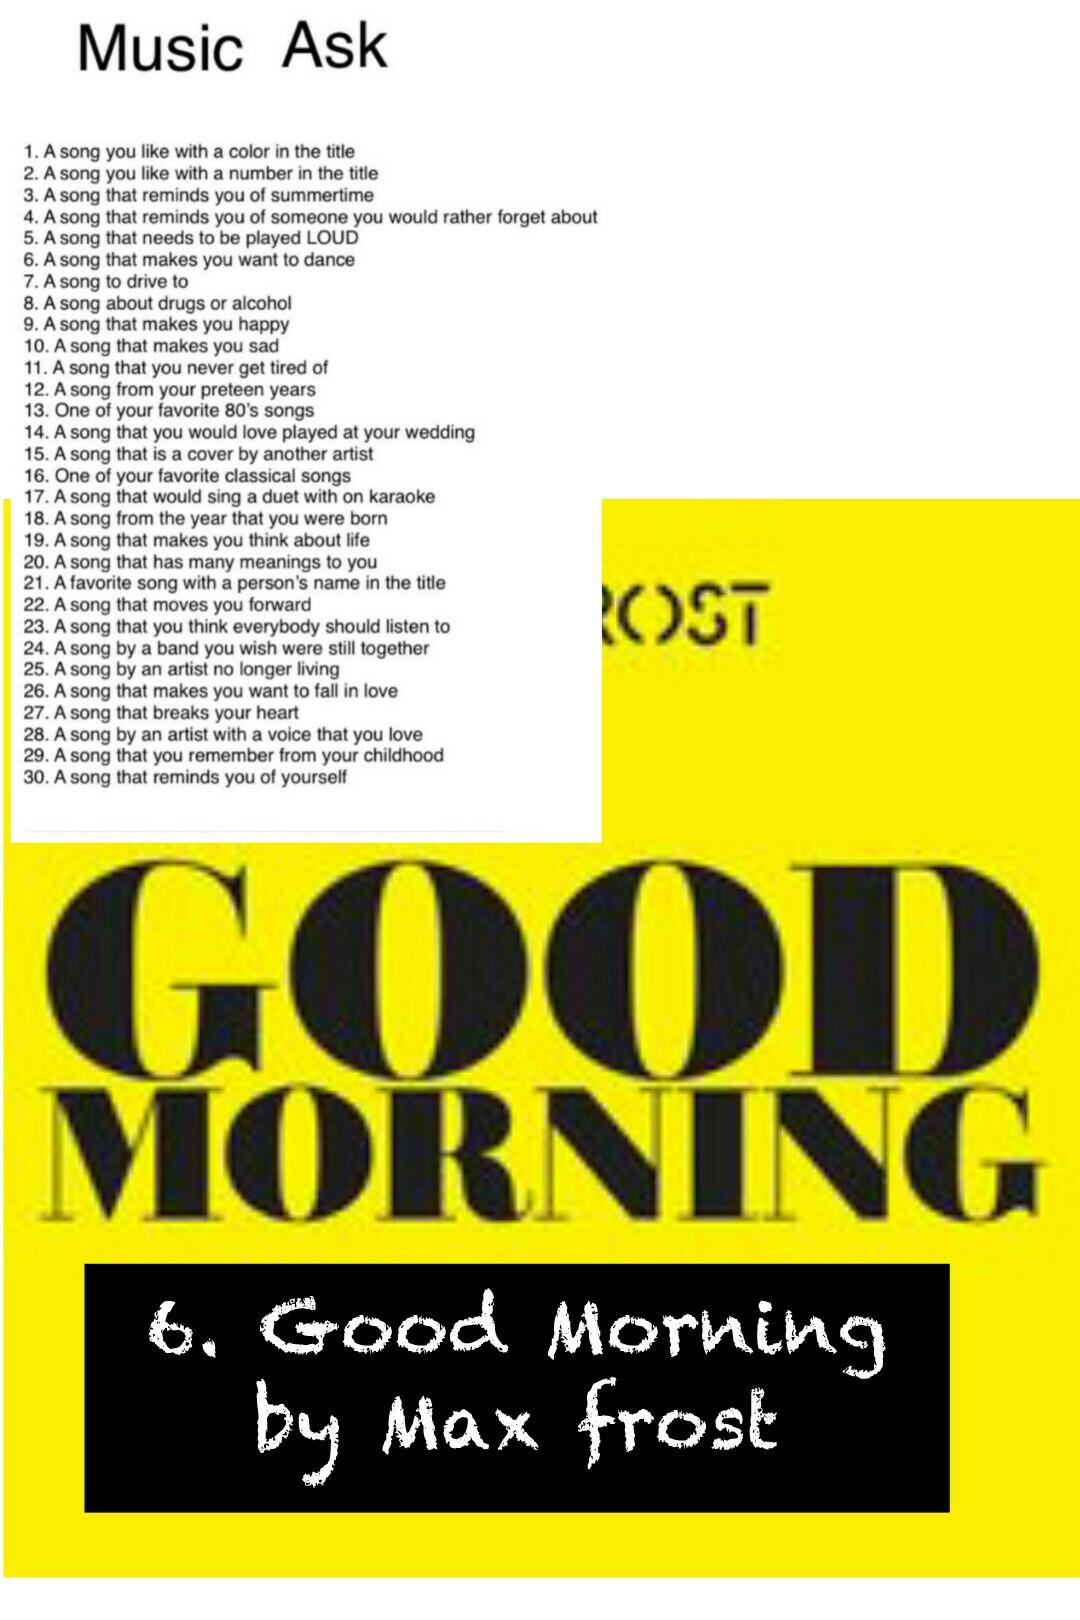 6. Good Morning 
by Max frost 